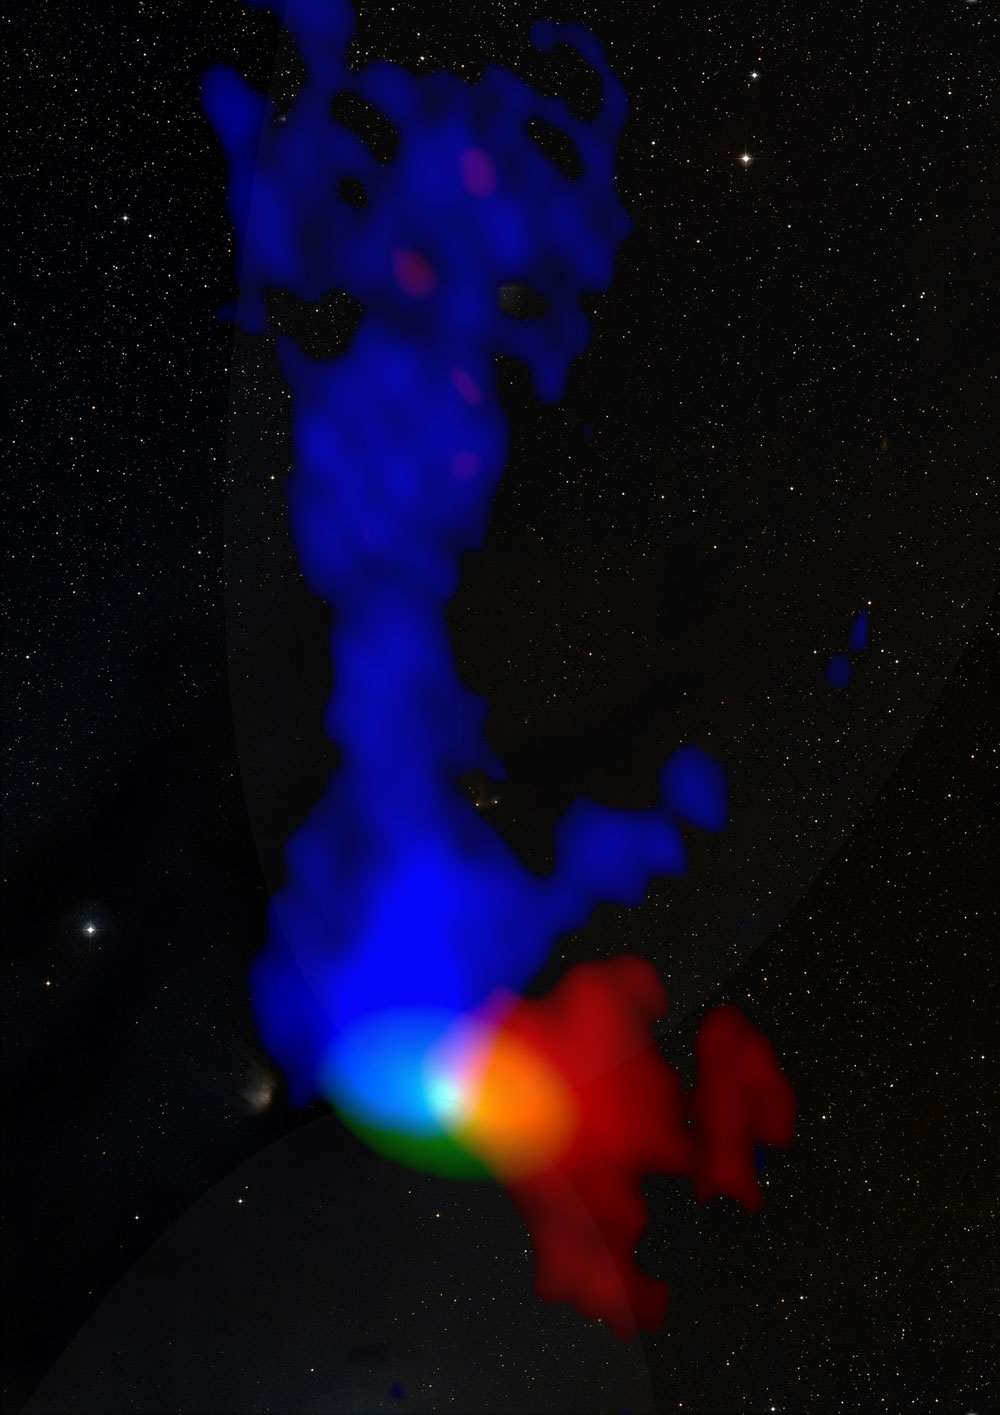 ALMA observations of a young protostar about 450 light years away